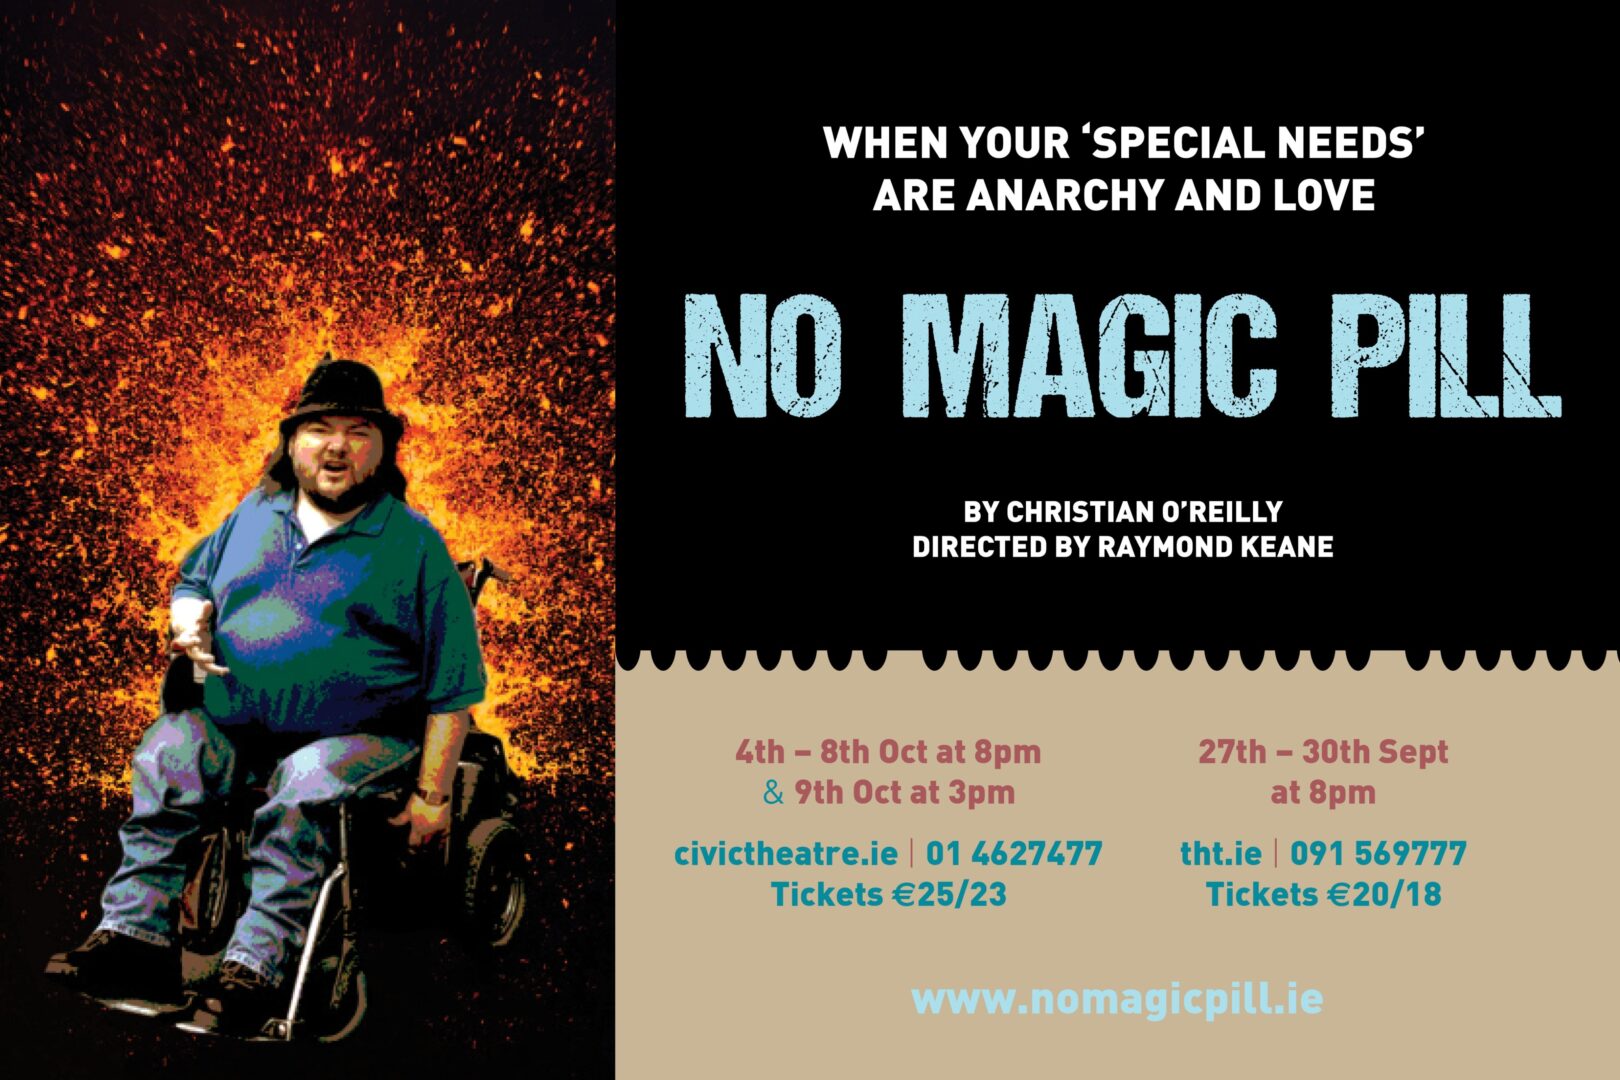 Poster for No Magic Pill play with image of Martin Naughten.